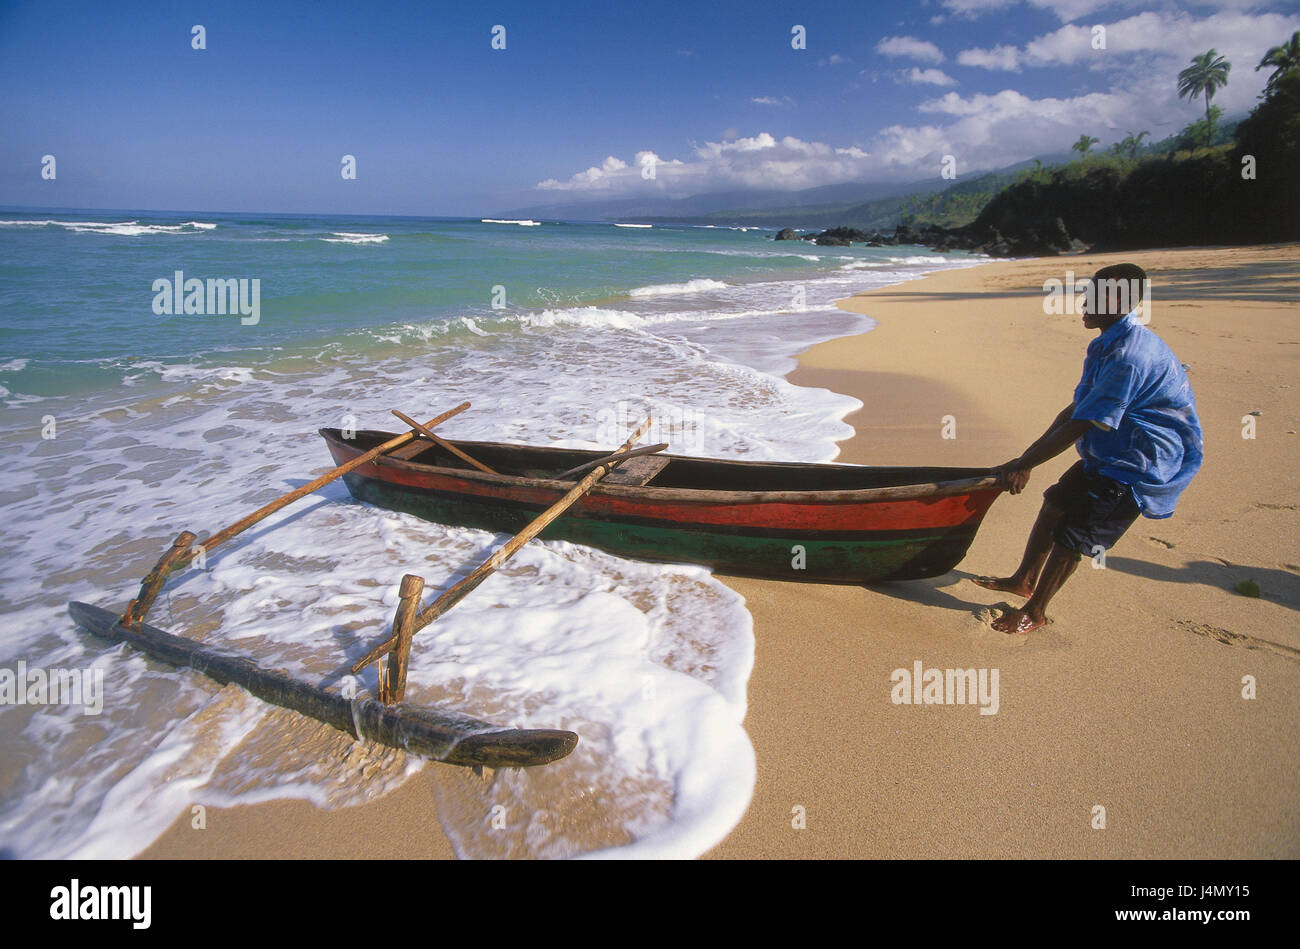 The Comoro Archipelago, island Anjouan, Moya, beach, fisherman, boot no model release! Africa, island state, Indian ocean, Nzwani, coast, sandy beach, angling, fishing boat, interpreter, outrigger, dugout, traditionally, man, non-white, swarthy, swarthy, local, drag, water, waves Stock Photo